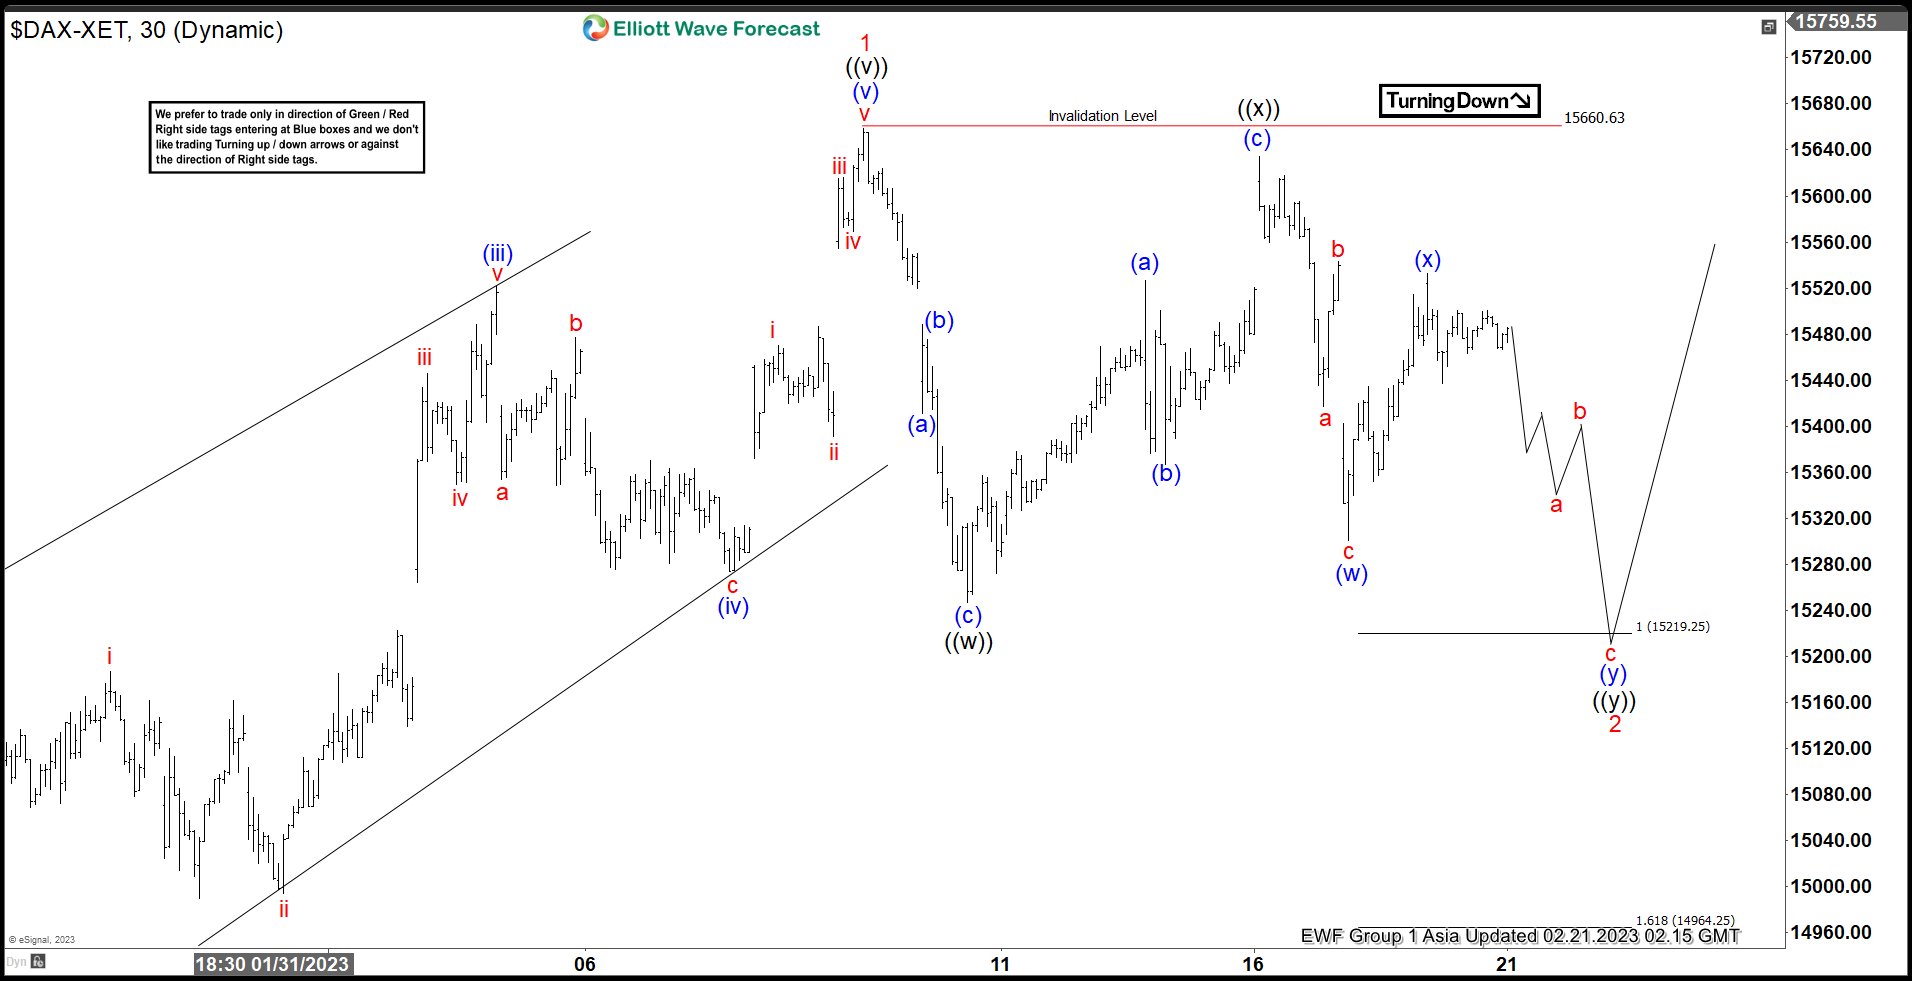 Elliott Wave Shows the Support Zone for DAX